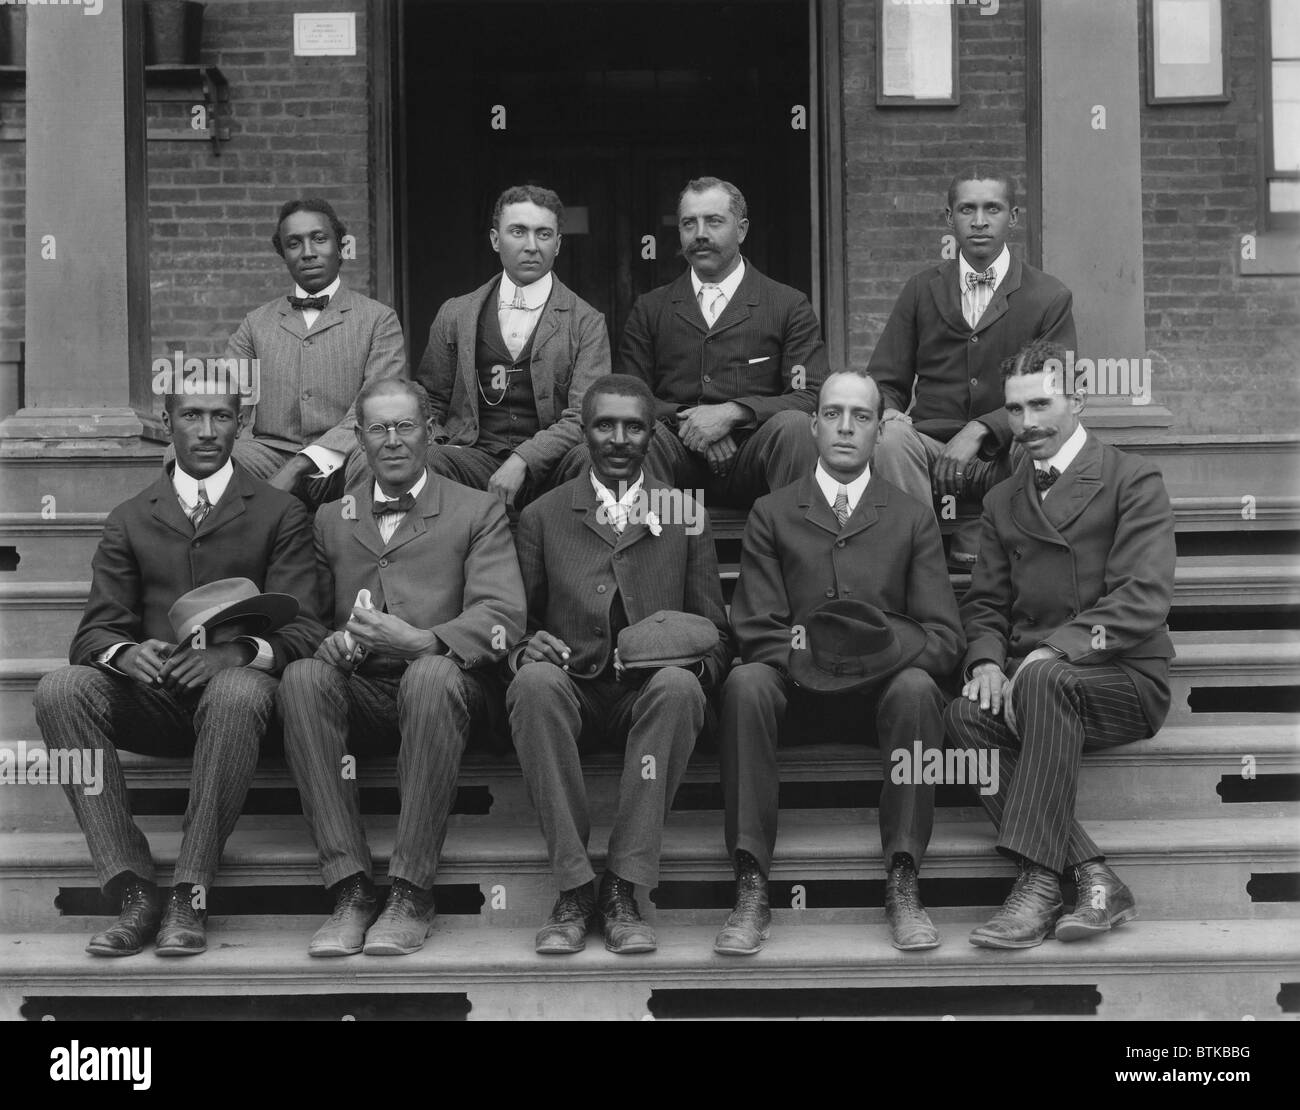 George Washington Carver (1864-1943) was named head of the Agriculture Department at the five year old Tuskegee Normal and Industrial Institute. 1902 portrait with his faculty and staff. Stock Photo